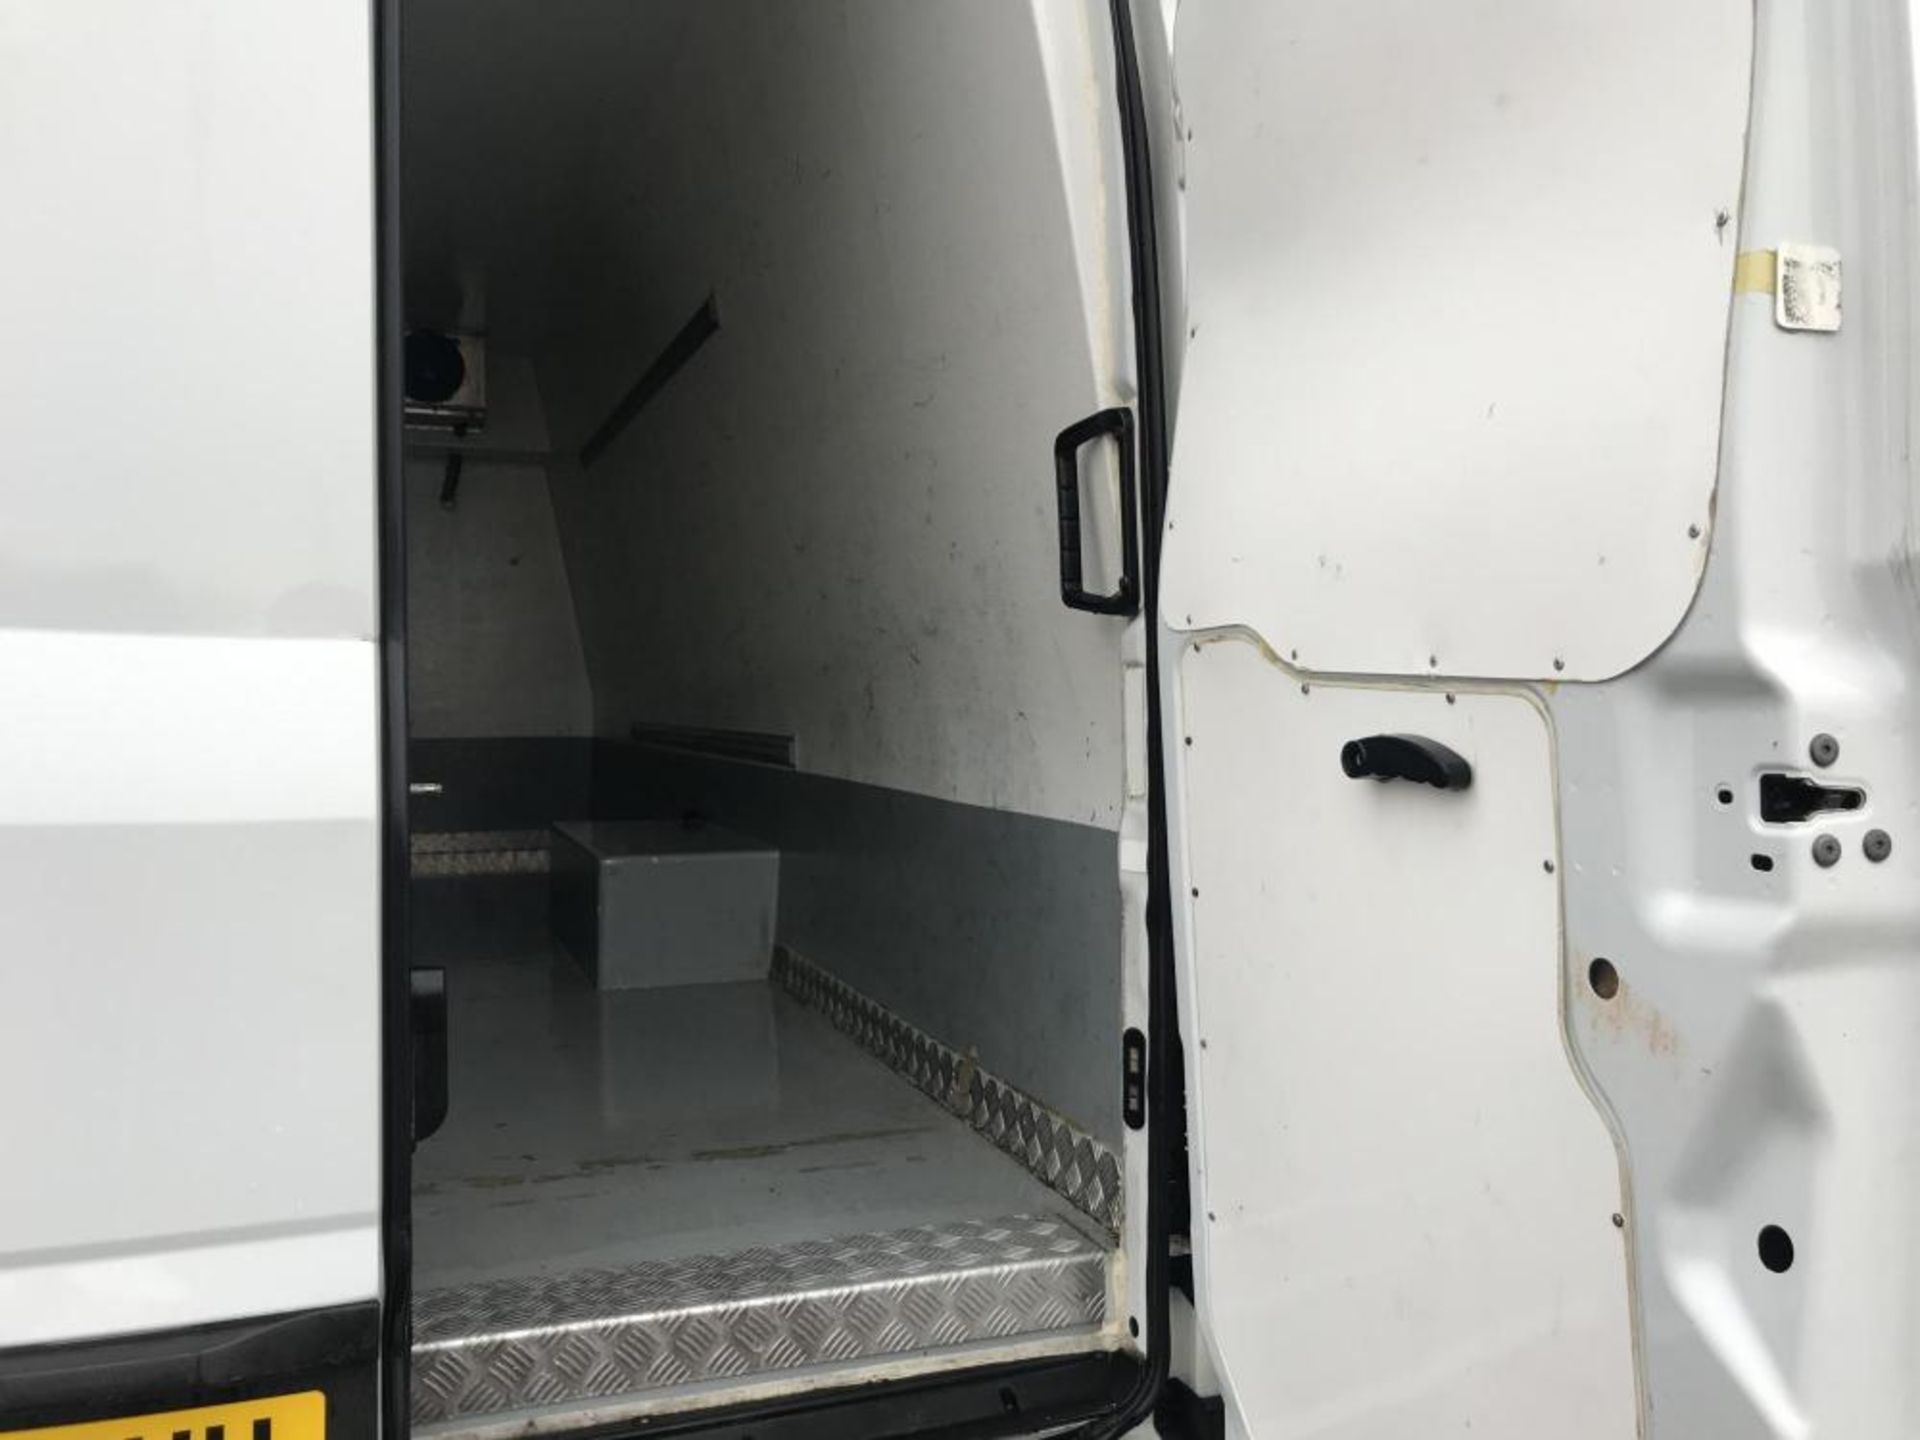 2016/65 REG IVECO DAILY 70C17 7 TON GROSS LWB REFRIGERATED 3.0 DIESEL PANEL VAN, 0 FORMER KEEPERS - Image 9 of 16